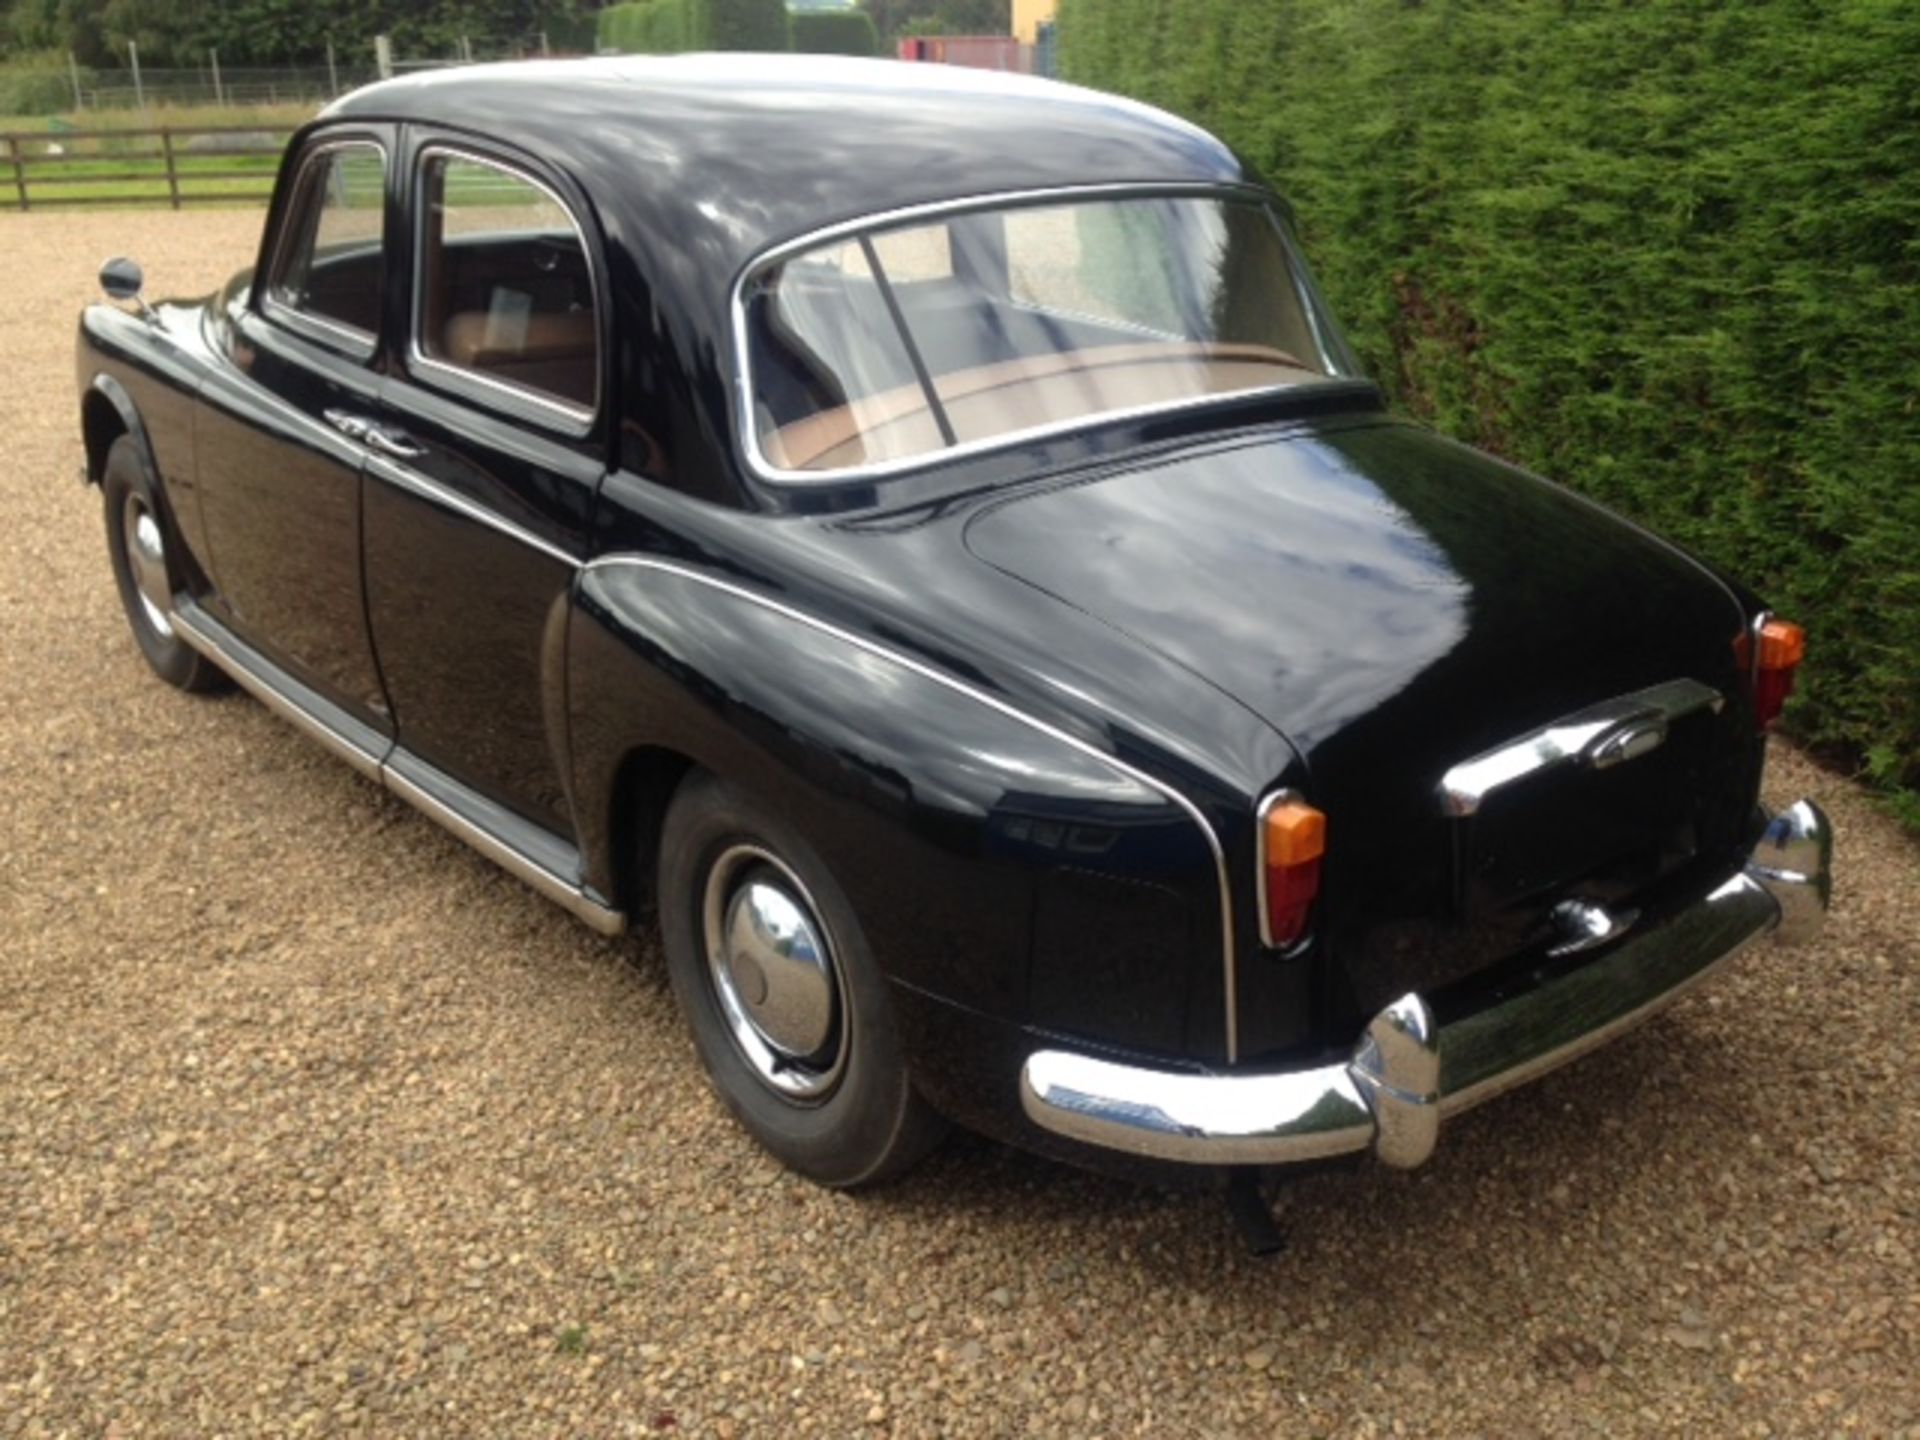 ROVER, 75 - 2230cc, Chassis number 606900013 - this example was originally exported by Rover as an - Image 10 of 15